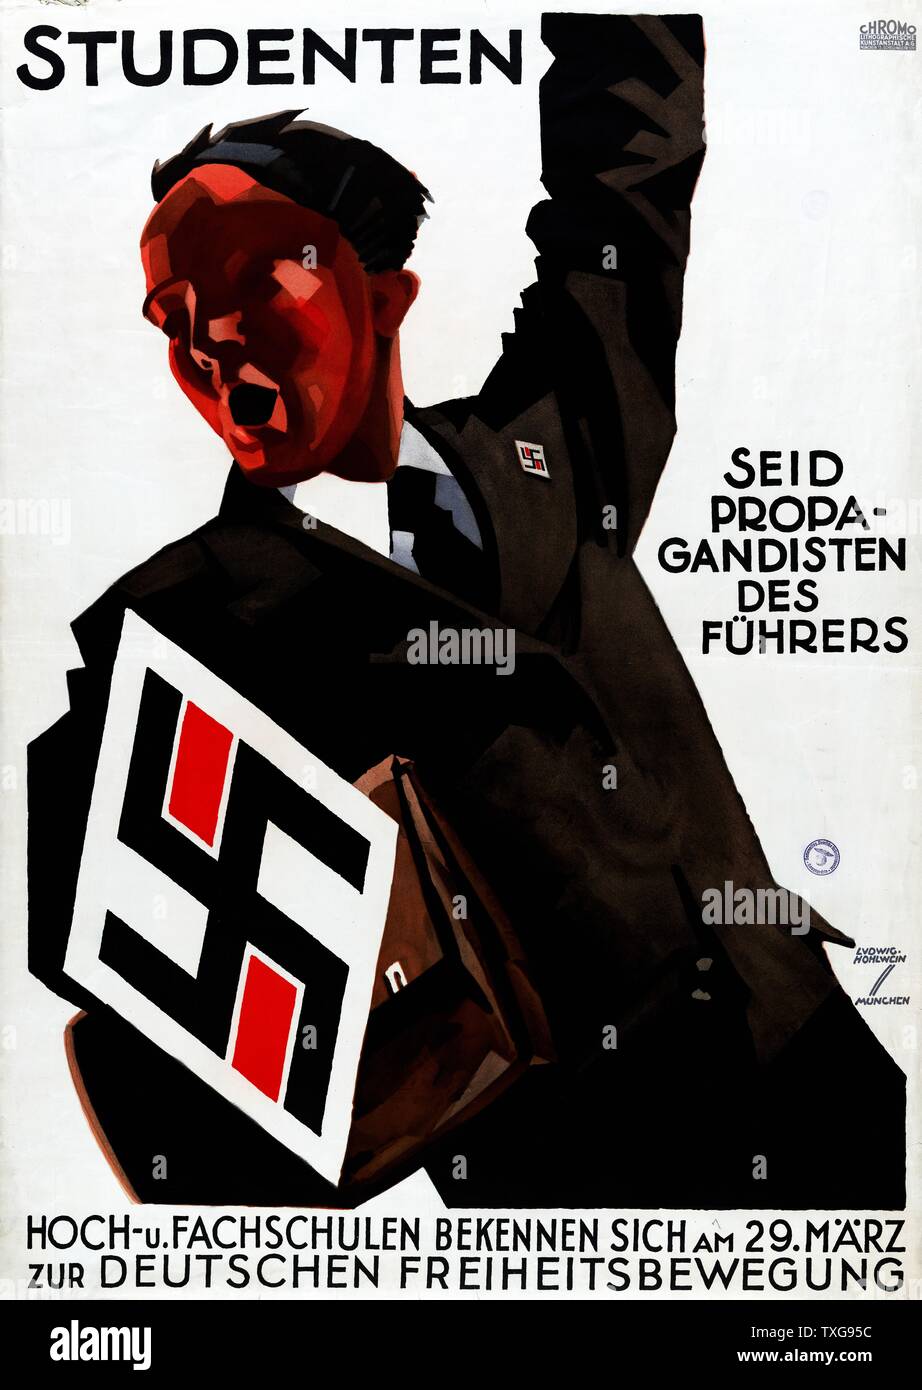 Nazi Propaganda poster : A man, left arm raised, urges students to be propagandists for Führer (Hitler). Large swastika, left, mirrored on lapel badge Stock Photo